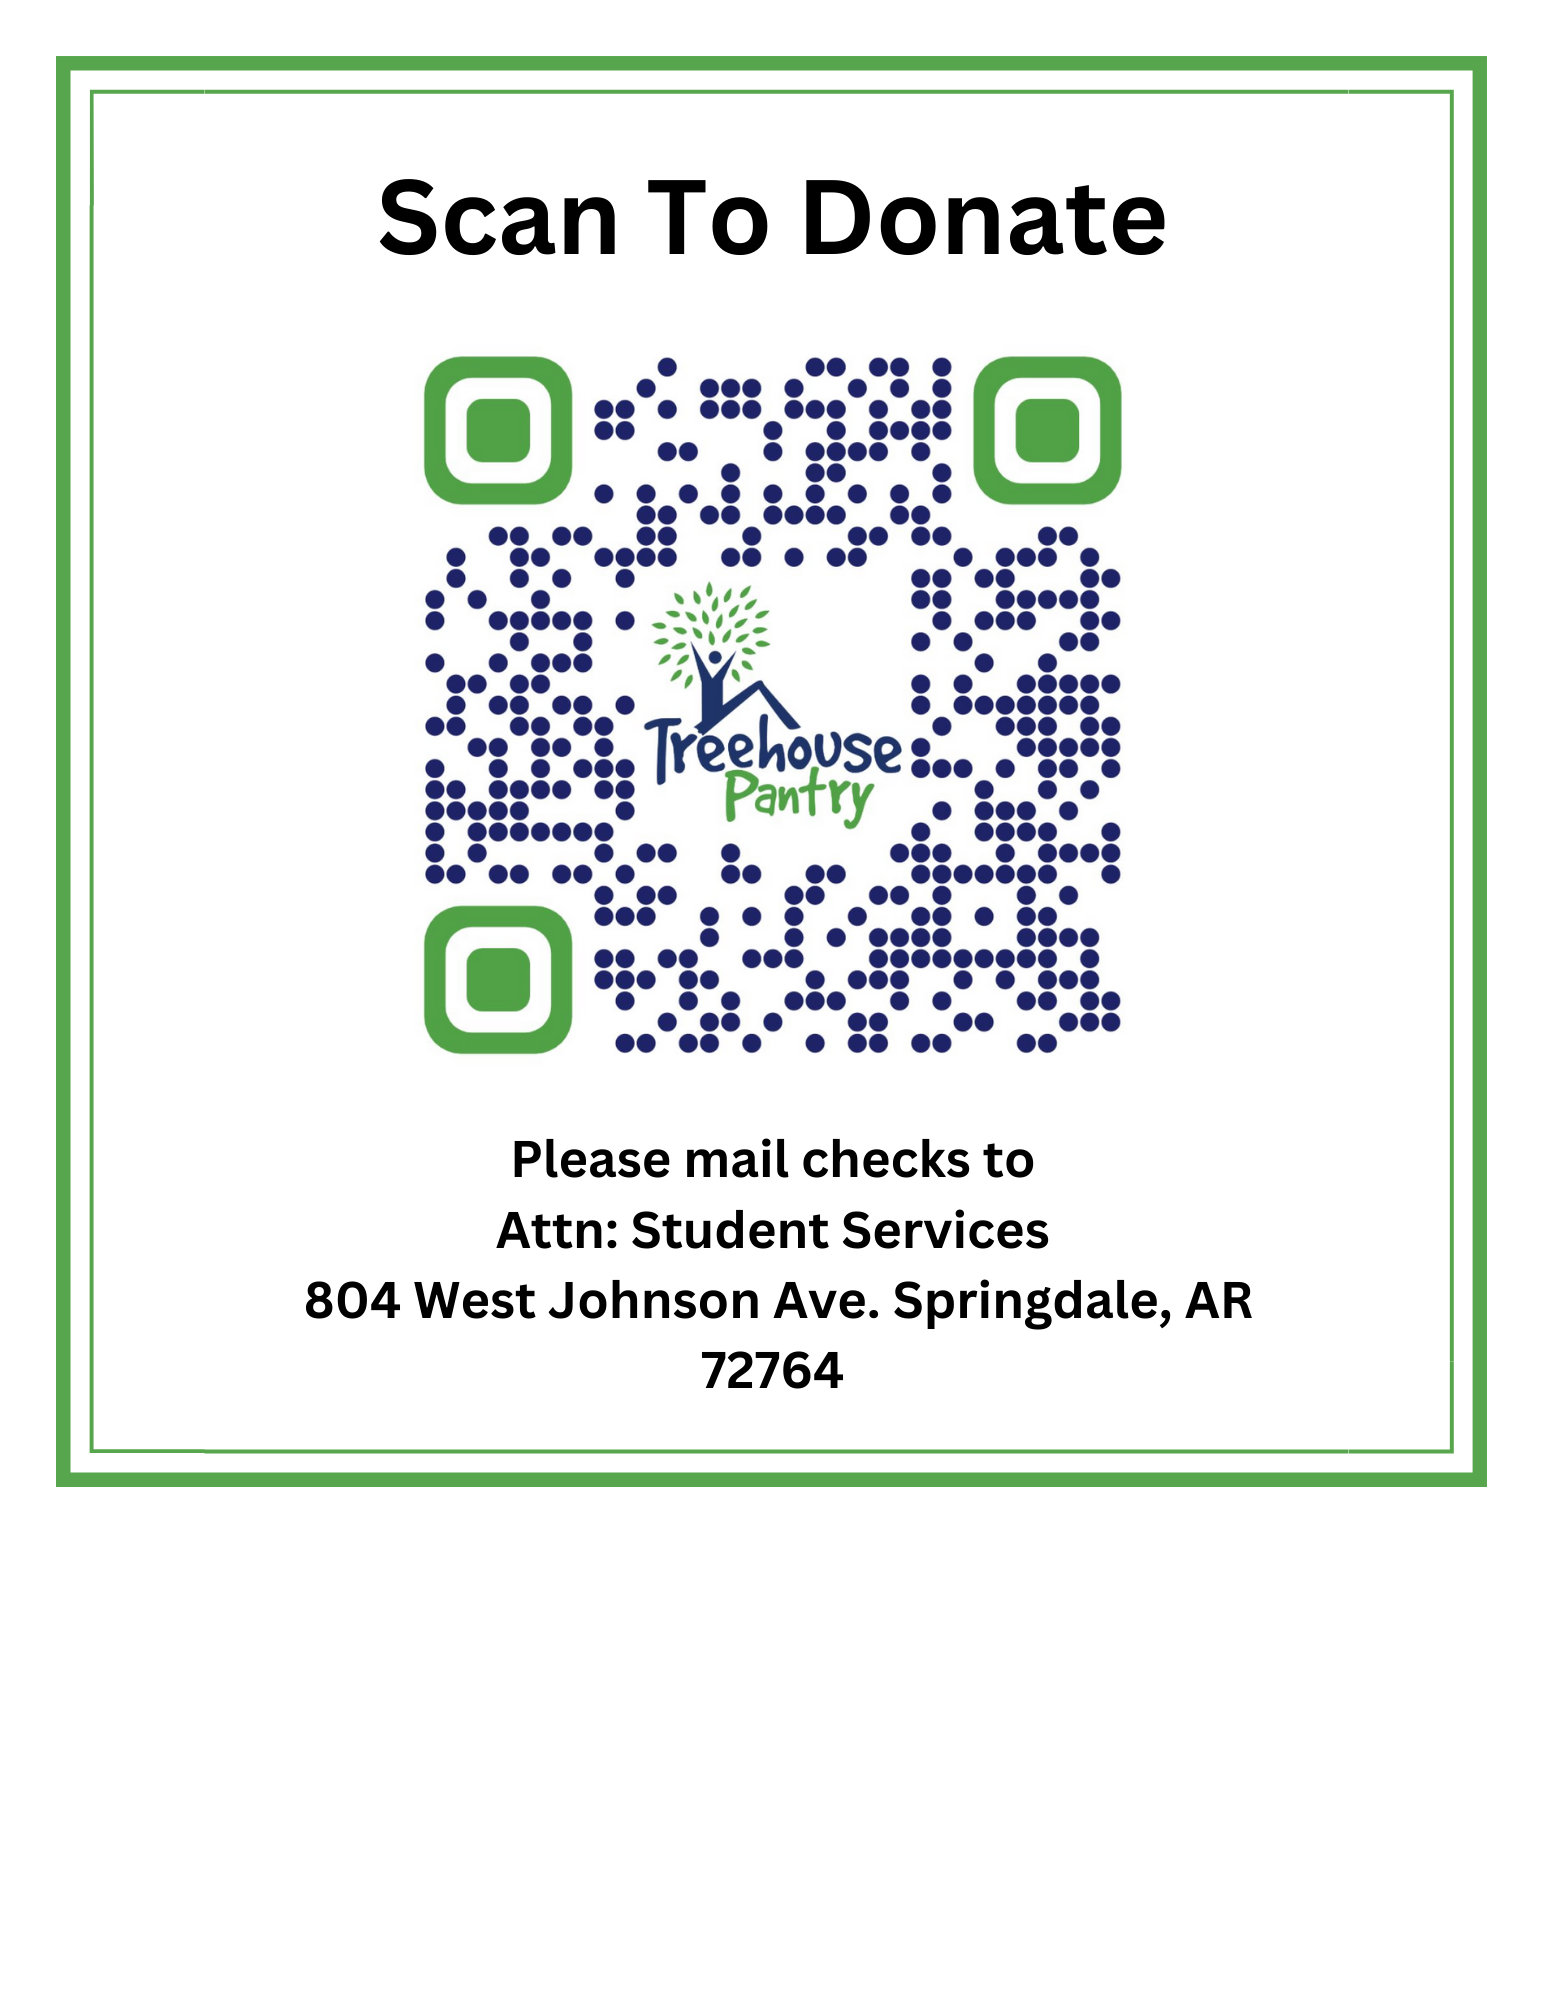 Scan To Donate